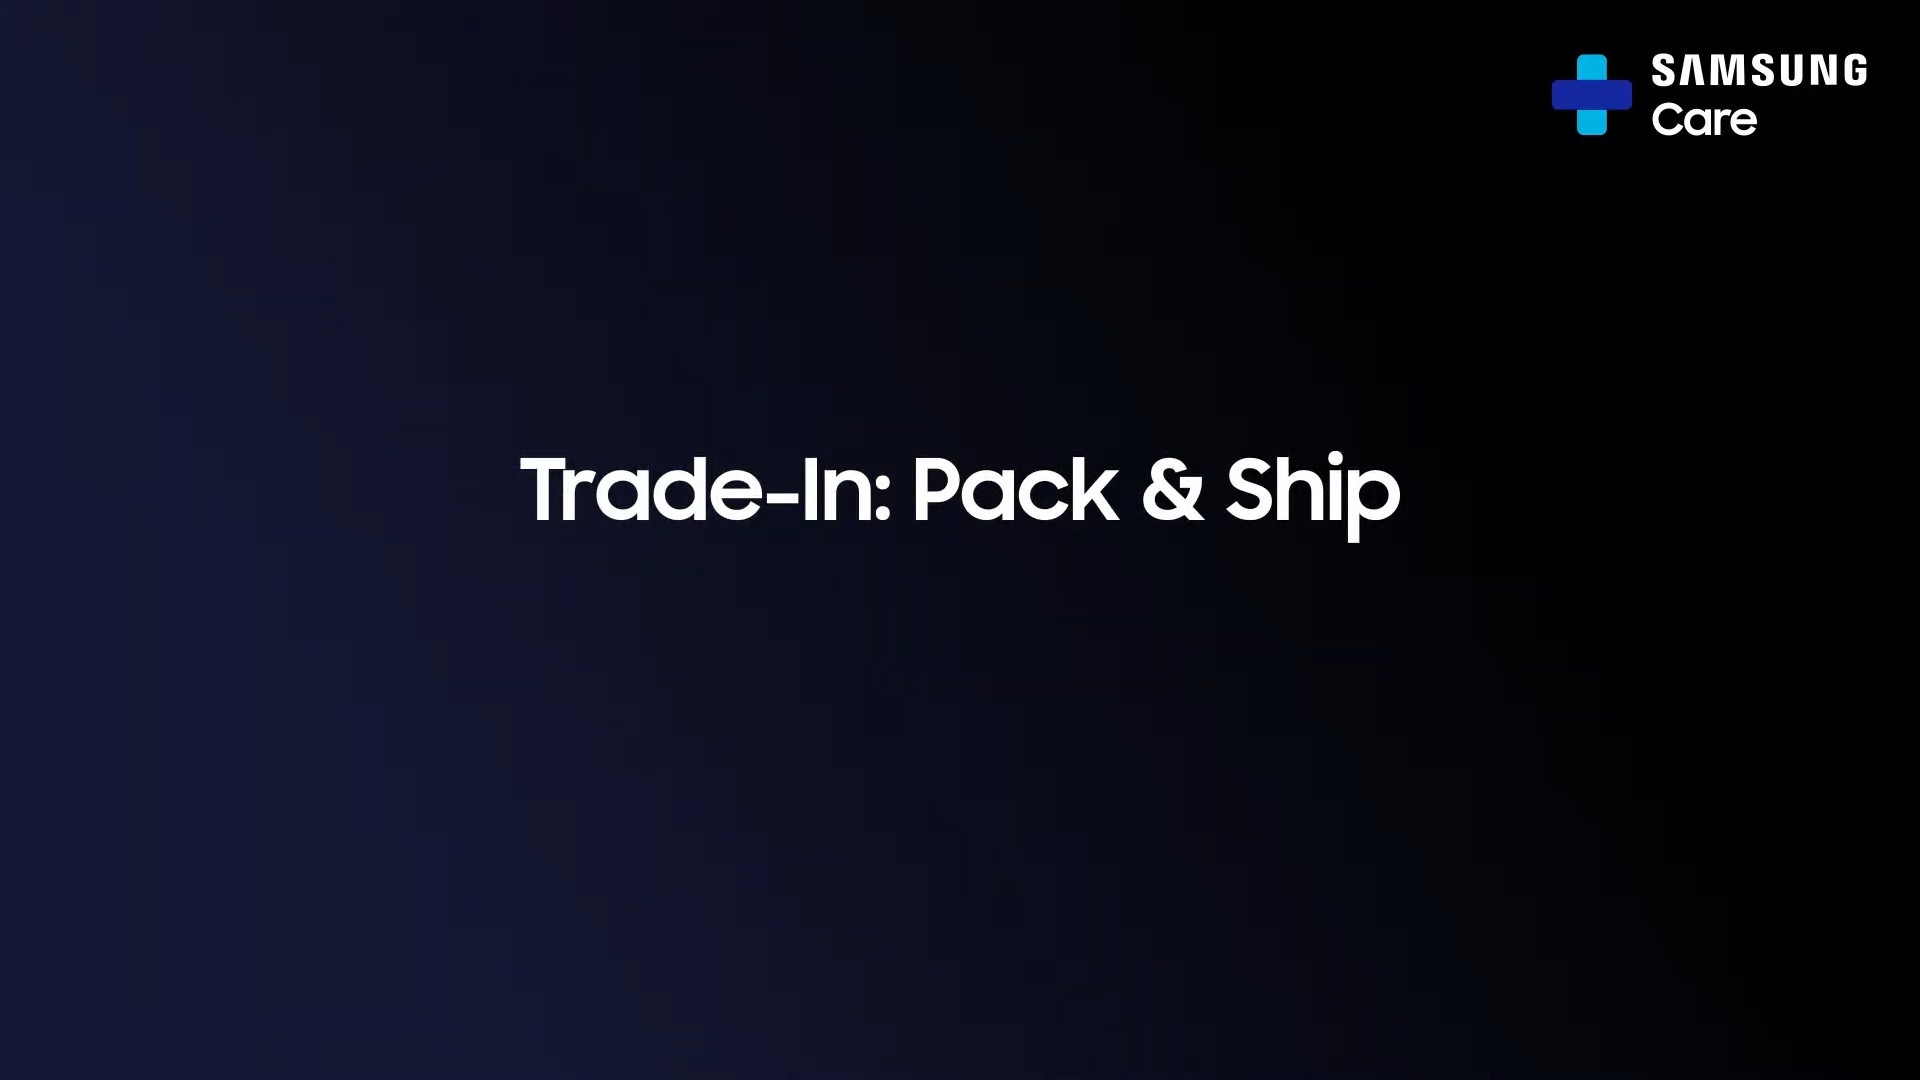 Device Trade-in: Is this a limited time deal or the normal one